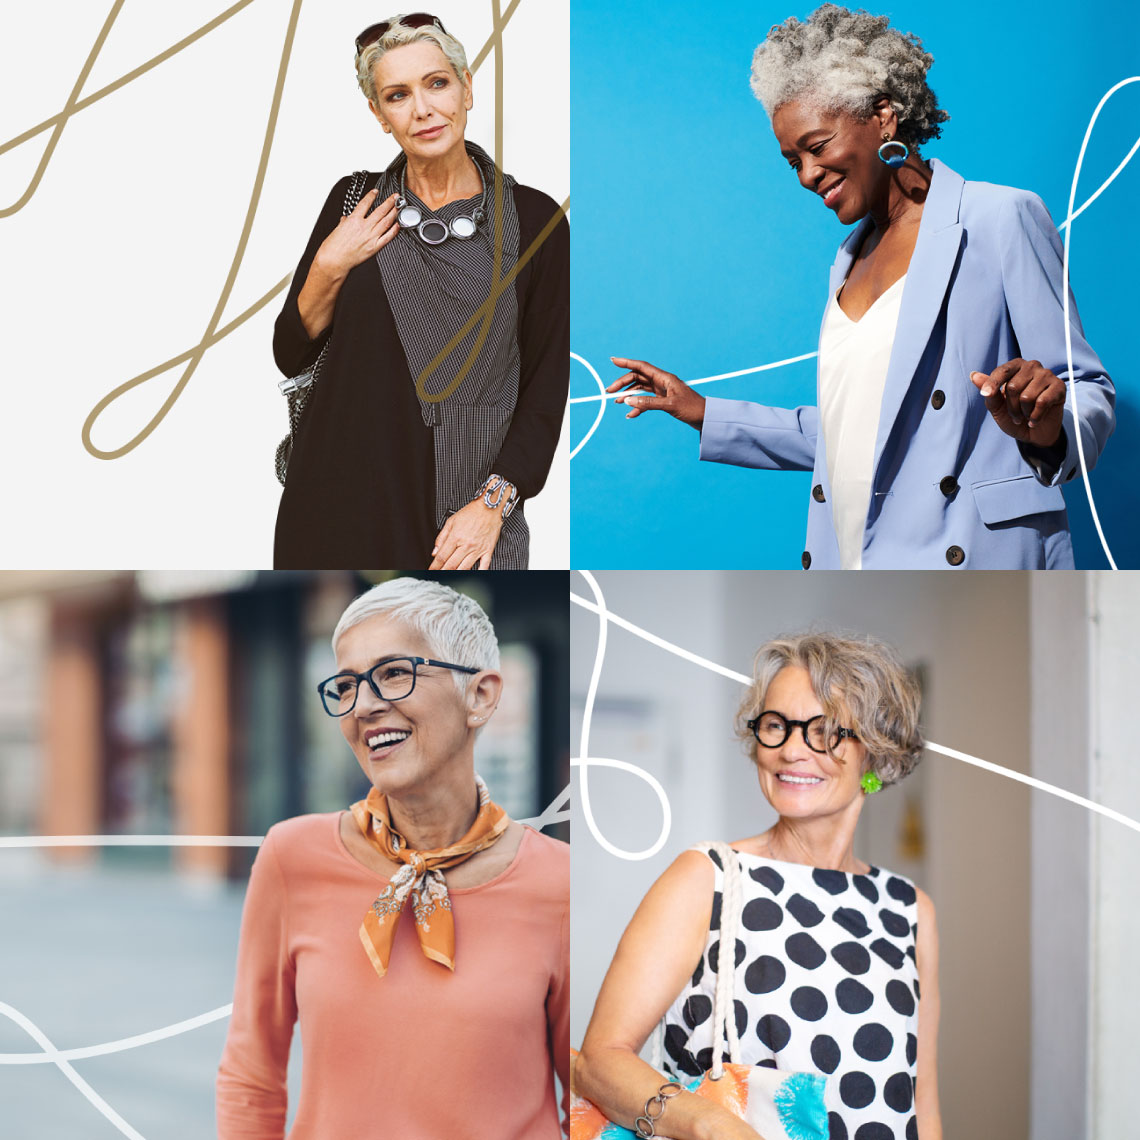 A collage of women wearing glasses and polka dots.